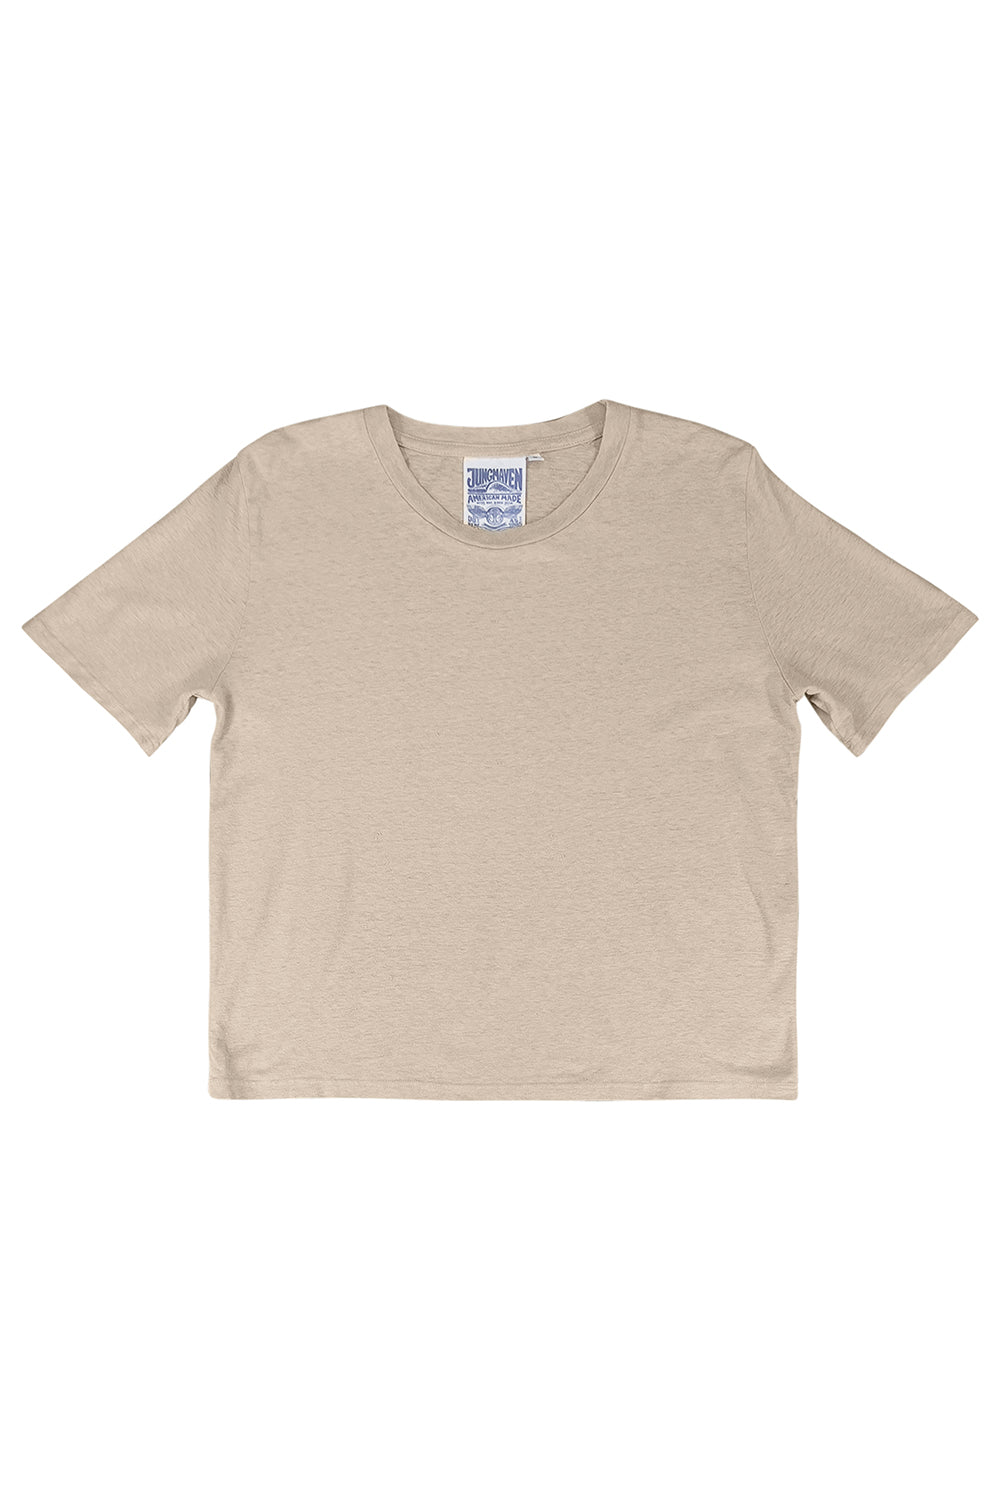 Silverlake Cropped Tee | Jungmaven Hemp Clothing & Accessories / Color: Canvas